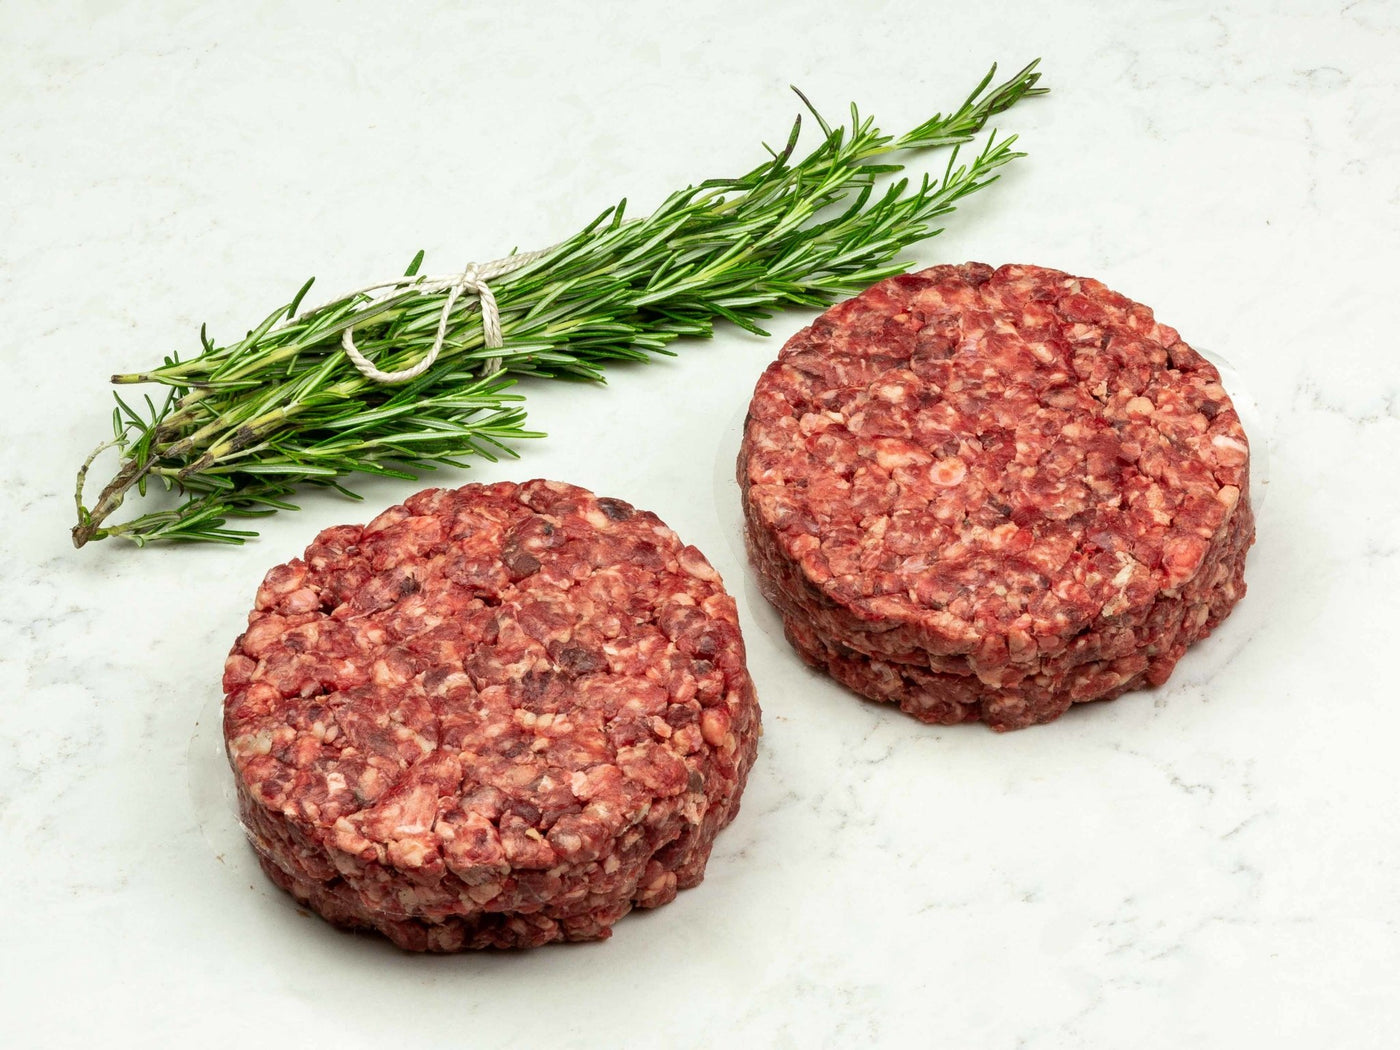 "The O.G." - Dry-Aged Burger 4 x 250g - Beef - Thomas Joseph Butchery - Ethical Dry-Aged Meat The Best Steak UK Thomas Joseph Butchery